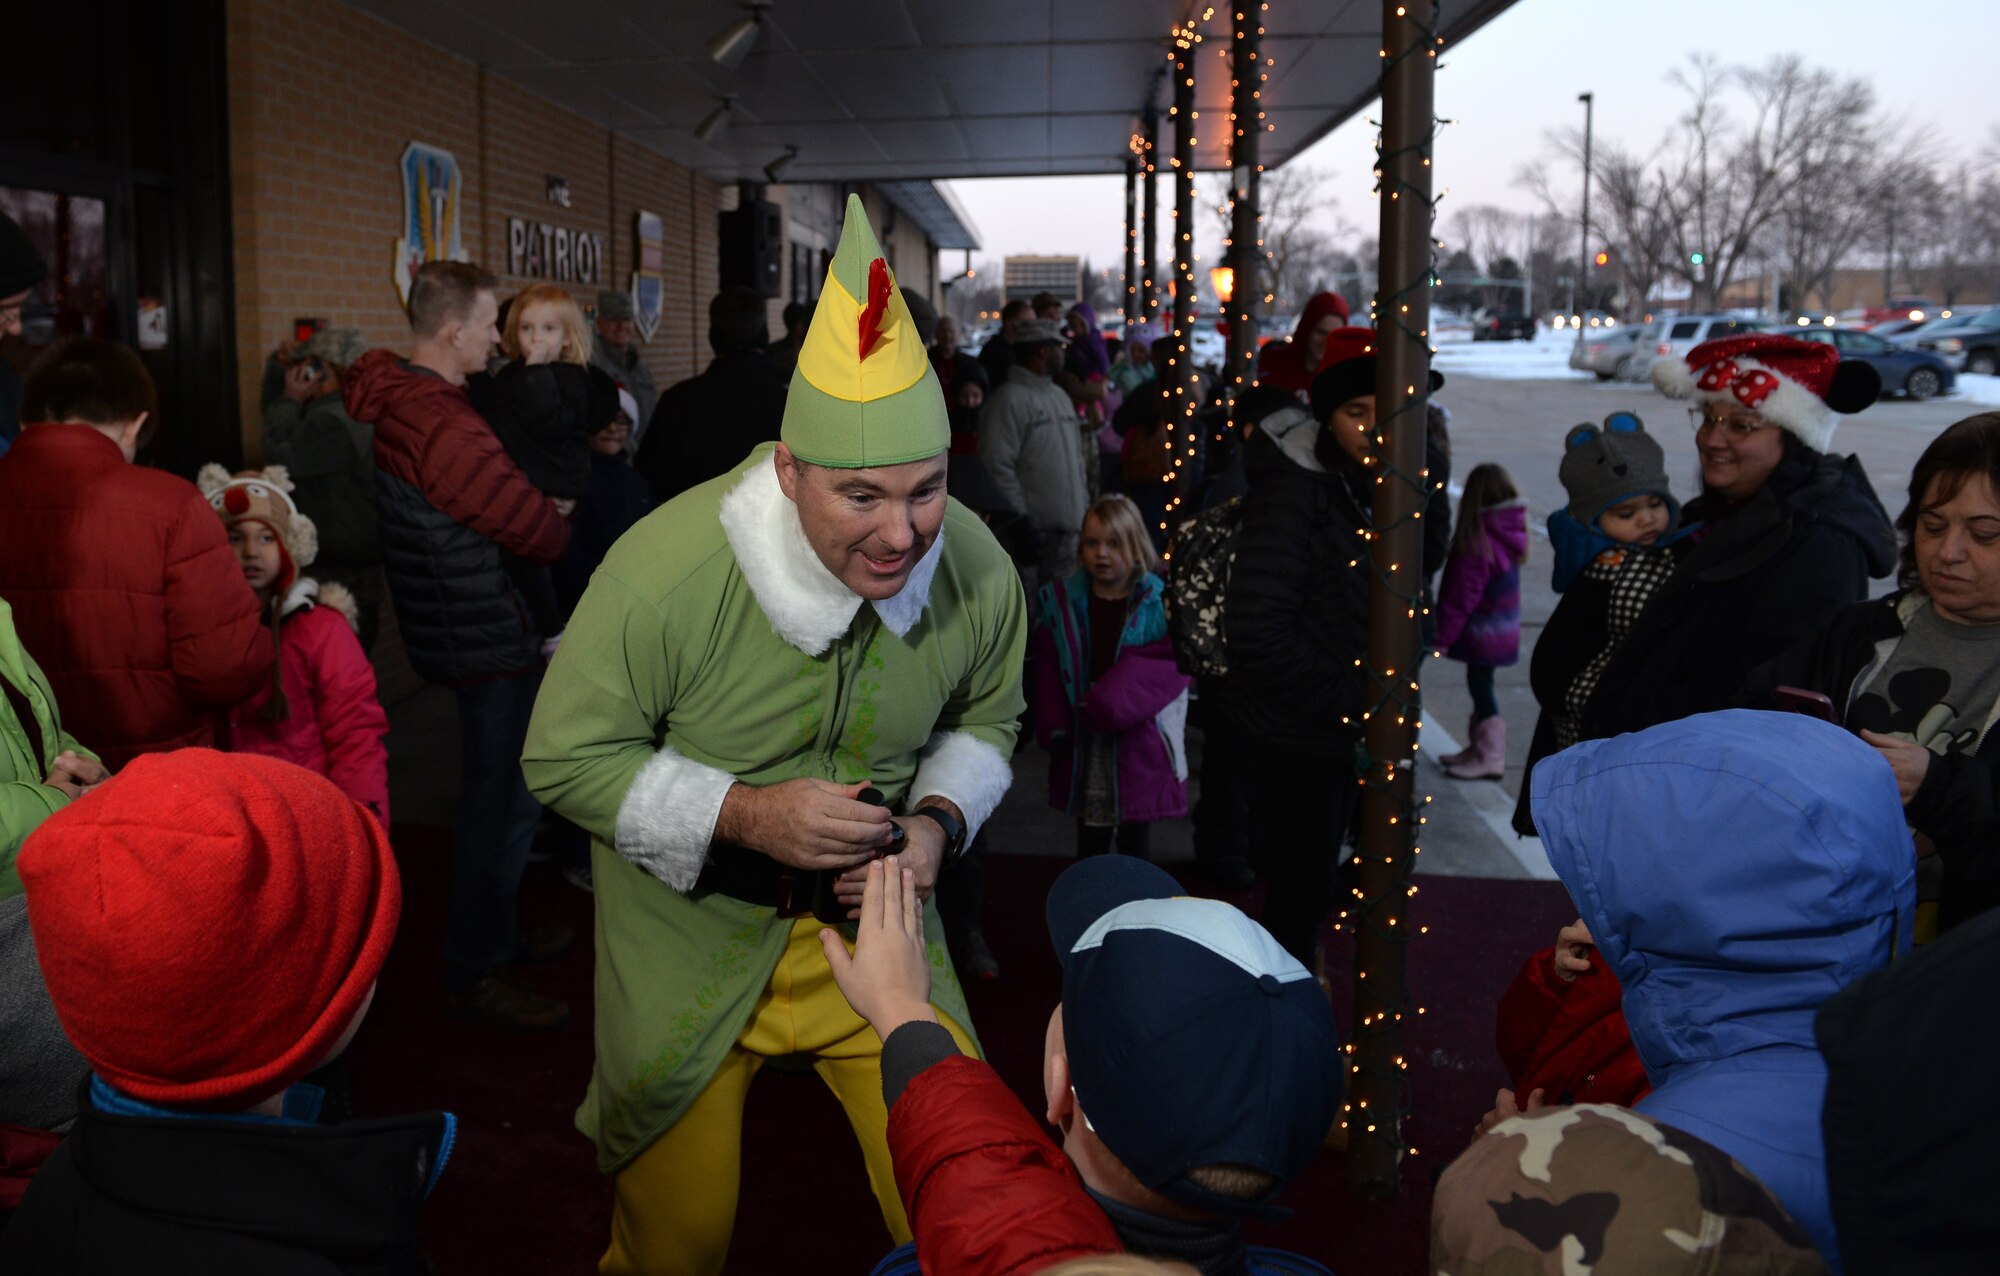 Senior Master Sgt. Charles Rose, 55th Wing Inspector General superintendent, entertains children as ‘Budd’ the elf during the annual Offutt Christmas Tree Lighting event held at the Patriot Club, Offutt Air Force Base, Nebraska, Dec. 6, 2018. Rose, along with being the festivities emcee, entertained guests throughout the club – always in character. (U.S. Air Force photo by Josh Plueger)